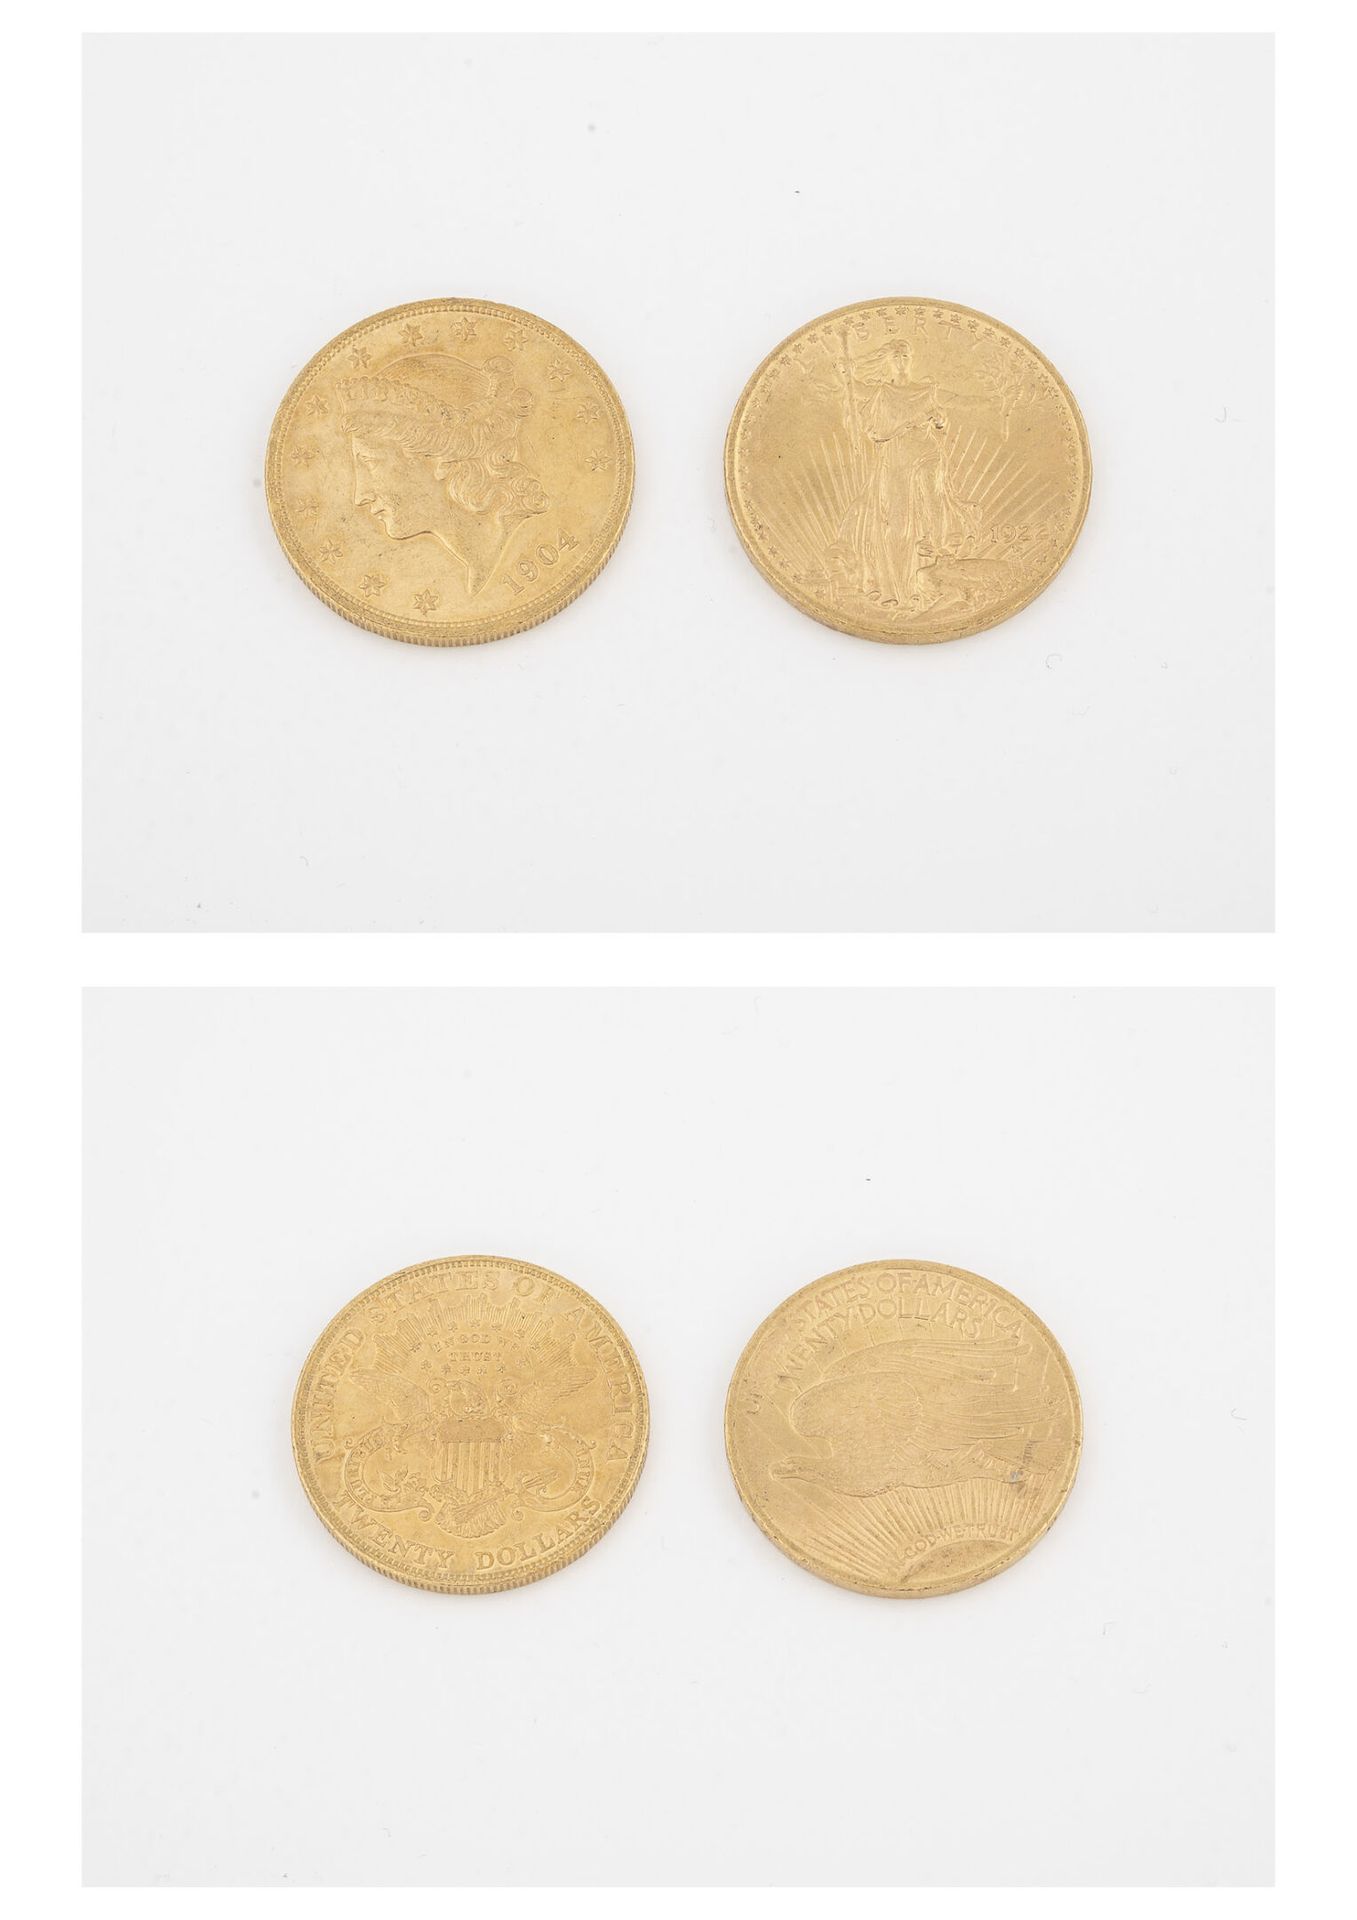 ÉTATS UNIS Two 20 dollars gold coins, 1904 and 1922. 

Total weight : 66.8 g. 

&hellip;